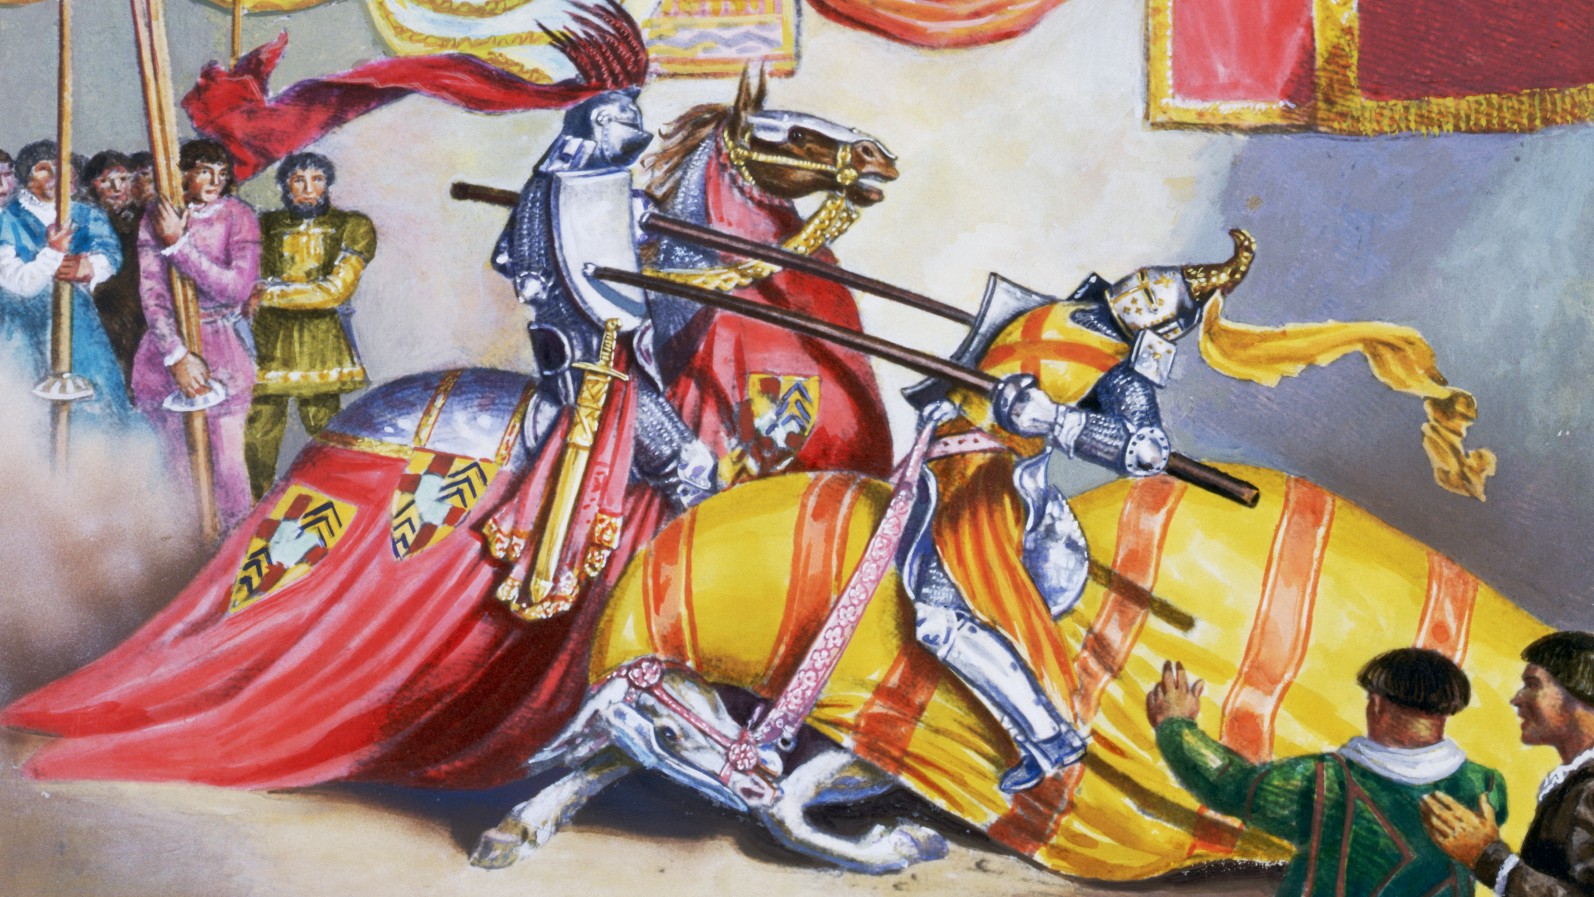 Jousting was an incredibly dangerous tournament, often people were seriously injured or died